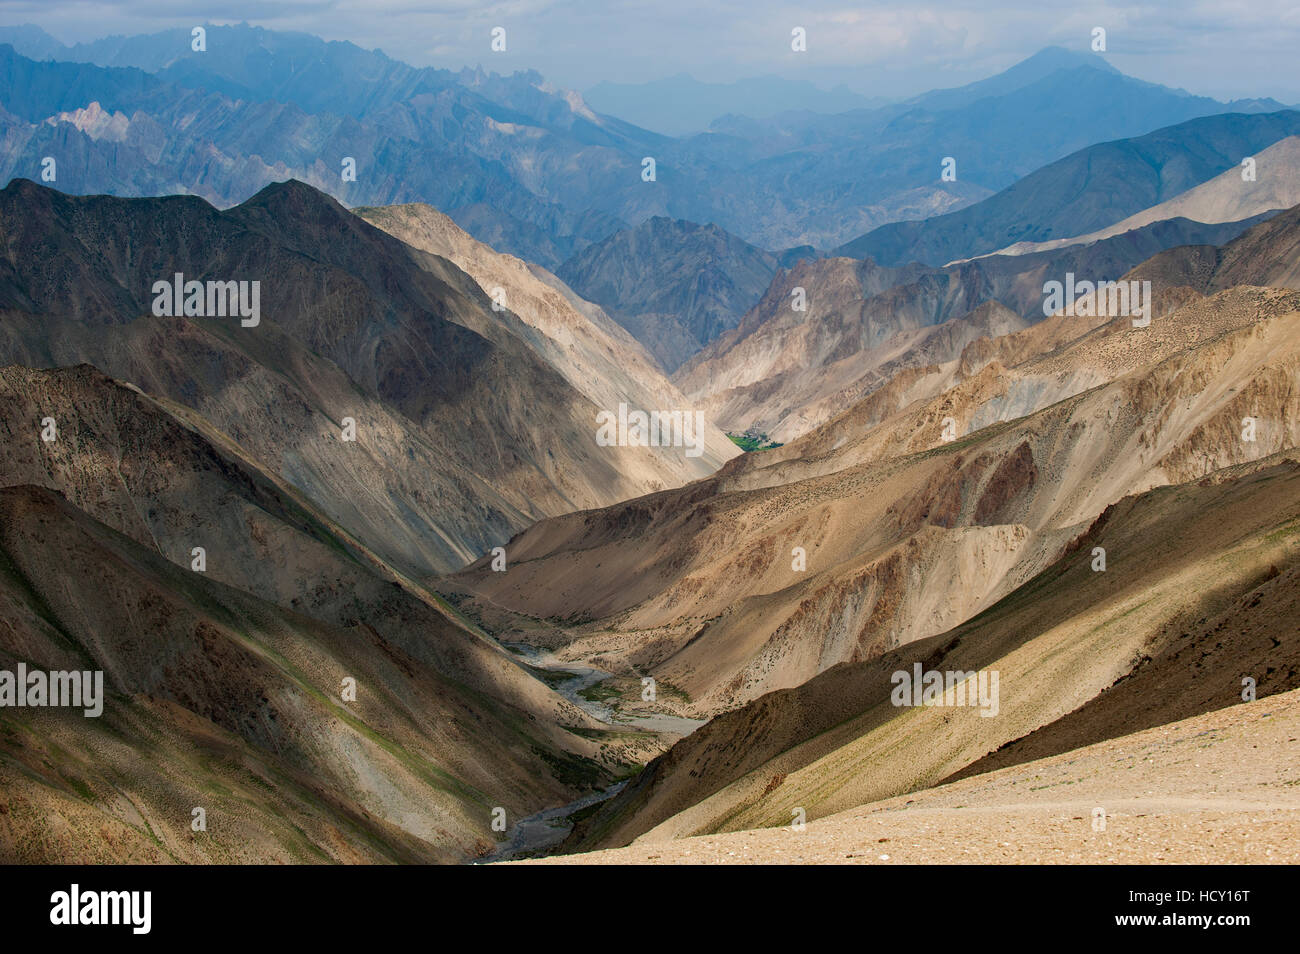 View from the top of the Konze La at 4900 m during the Hidden Valleys trek in Ladakh, India Stock Photo